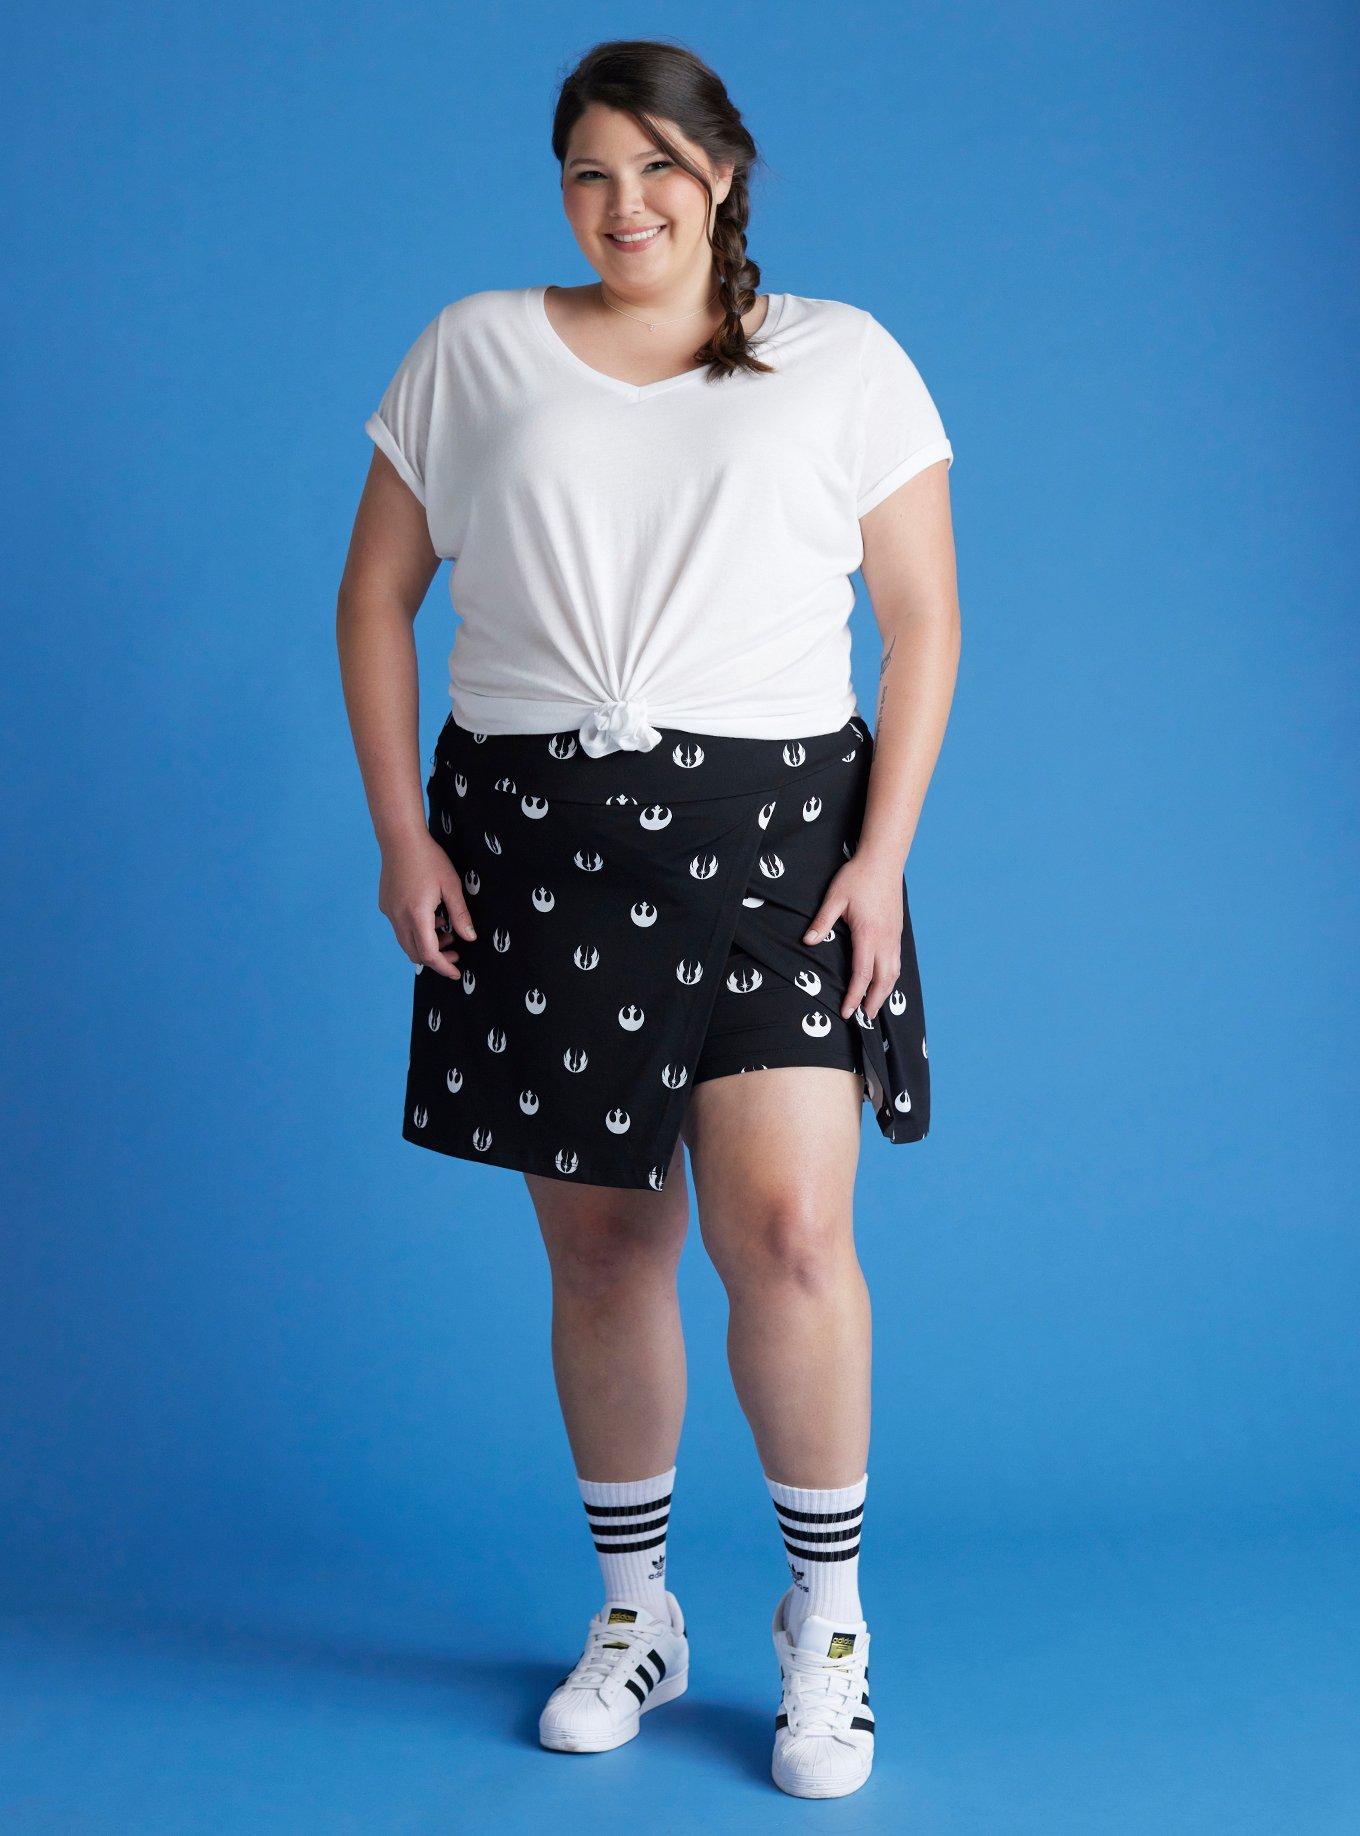 Her Universe Star Wars Icons Asymmetrical Athletic Skort Plus Size Her Universe Exclusive, BLACK  WHITE, hi-res